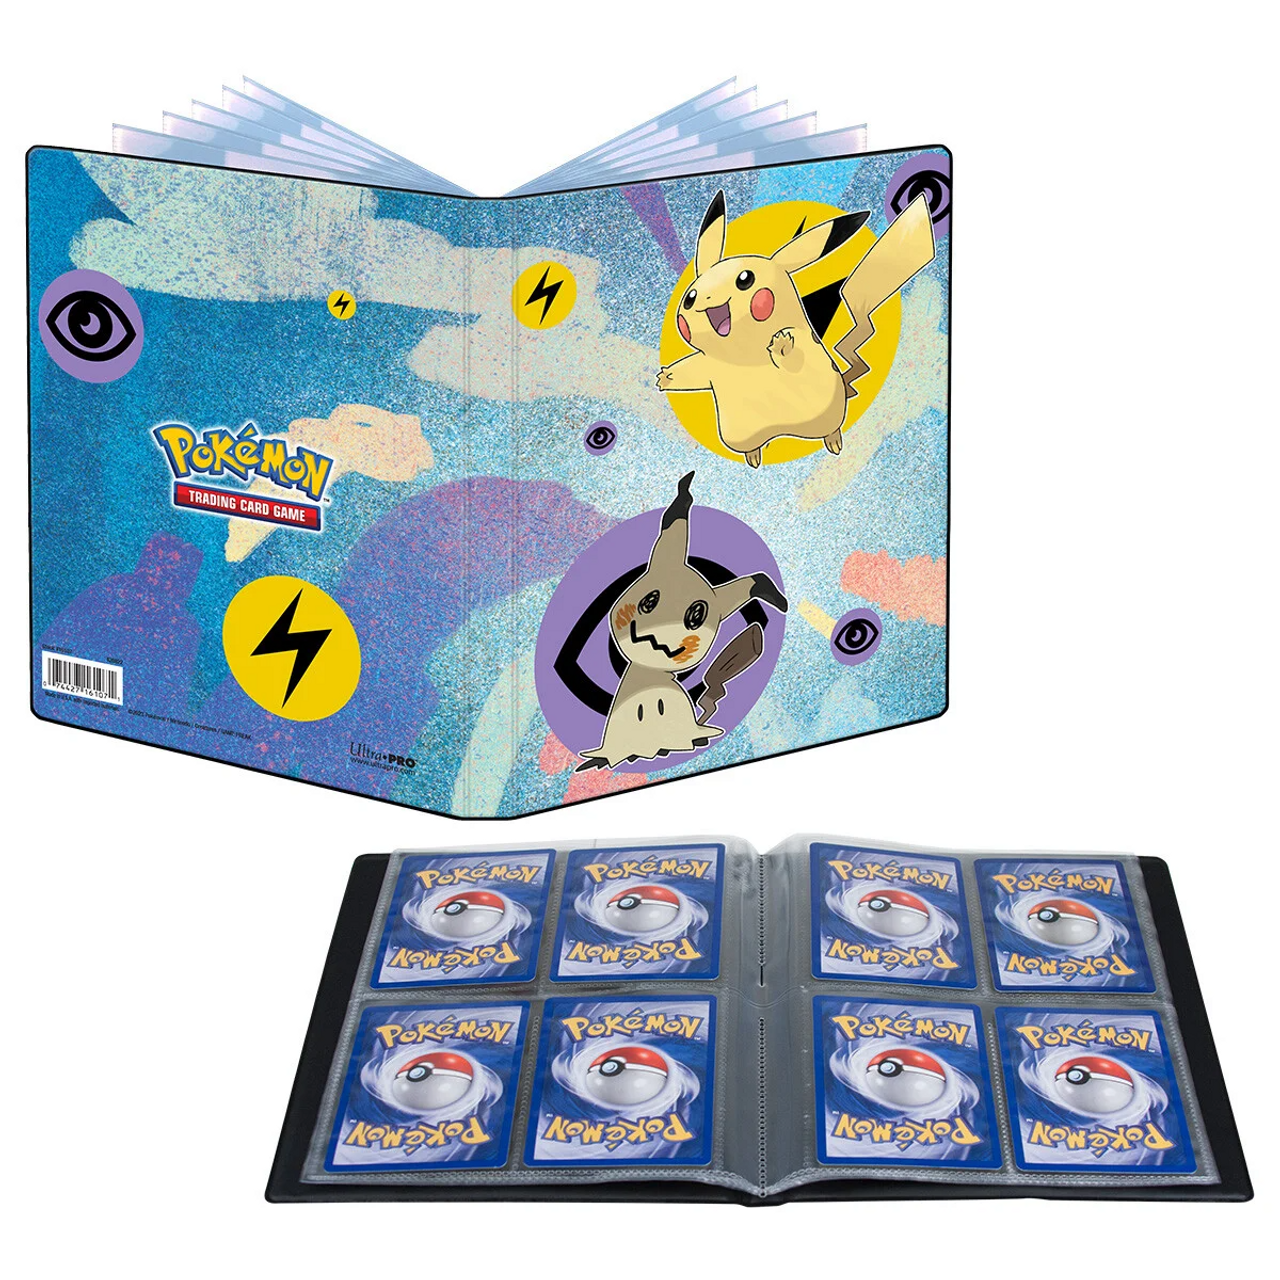 Pokémon: Sword and Shield 4-Pocket Portfolio - Ultra Pro, Holds & Protects  40 Single-Loaded or 80 Double-Loaded Trading Cards